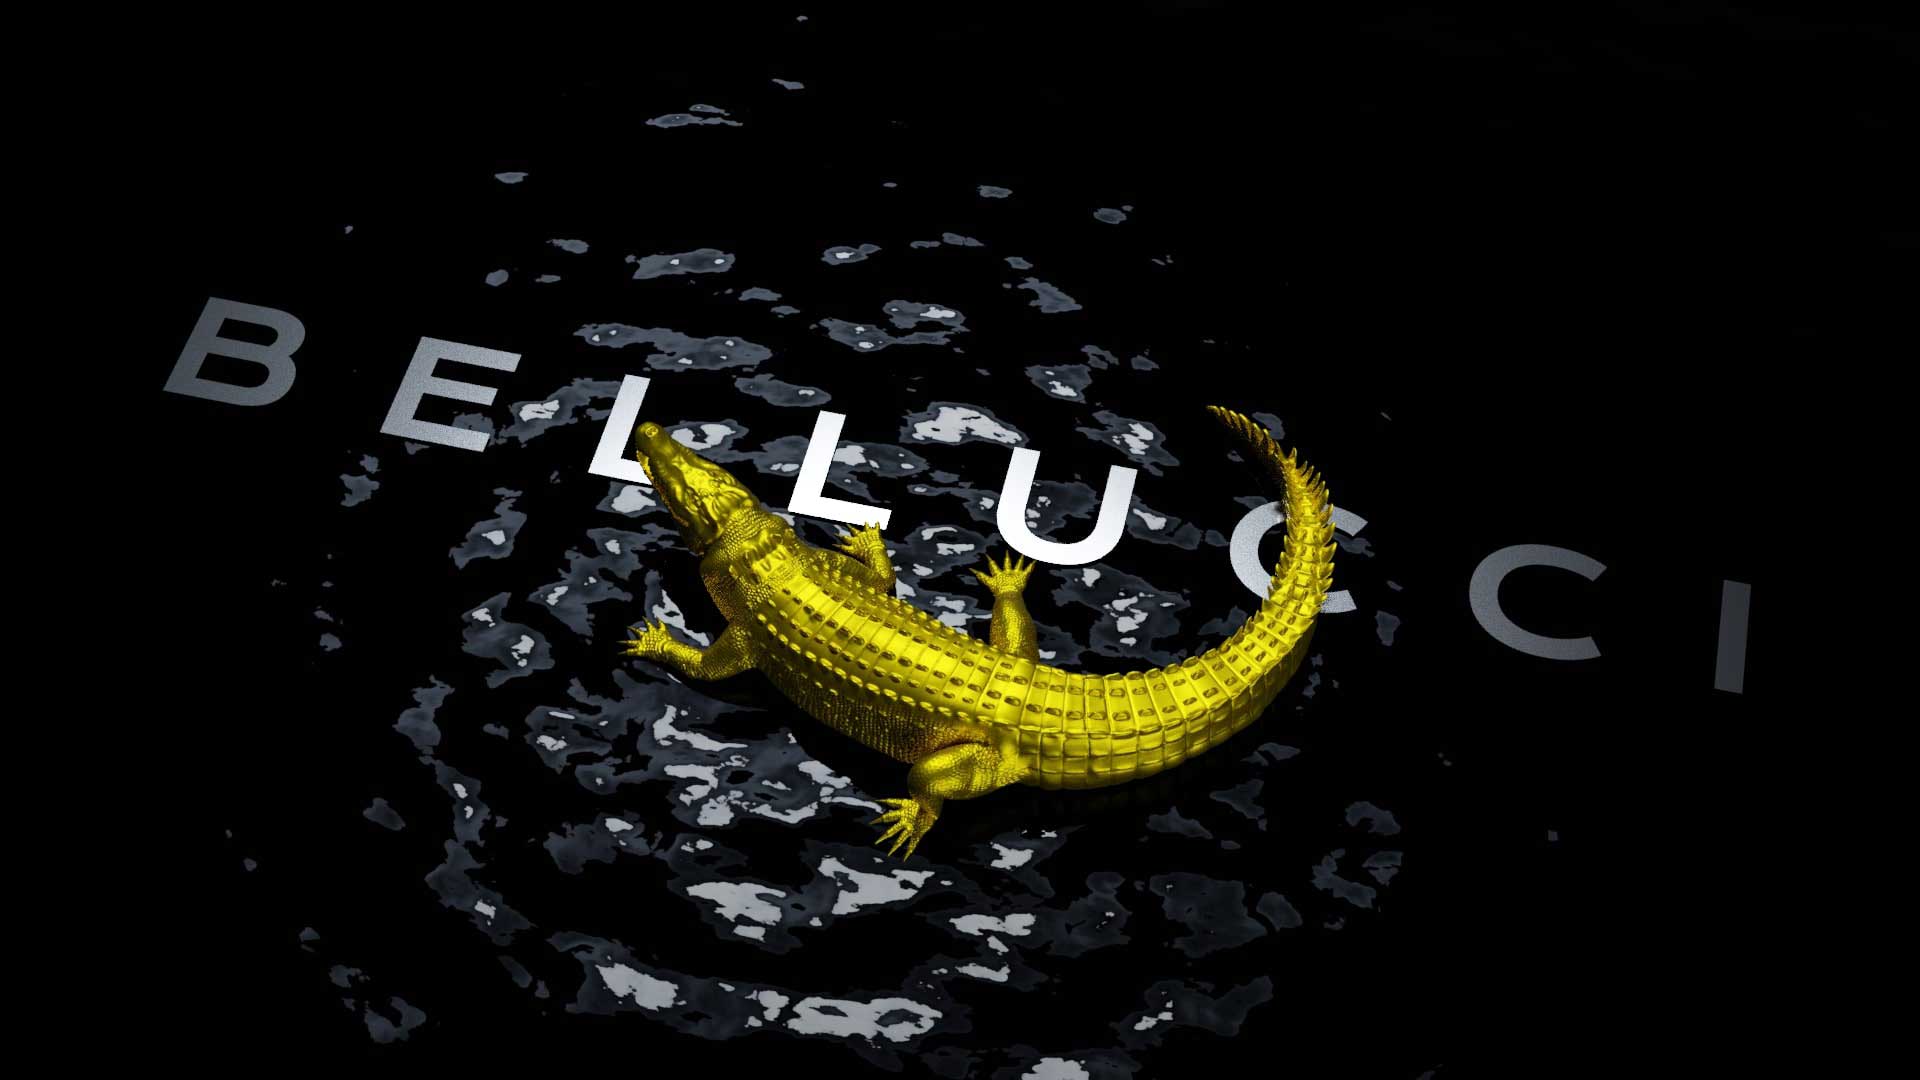 Branding and Visual Communications for Bellucci Italian Luxury Fashion Brand